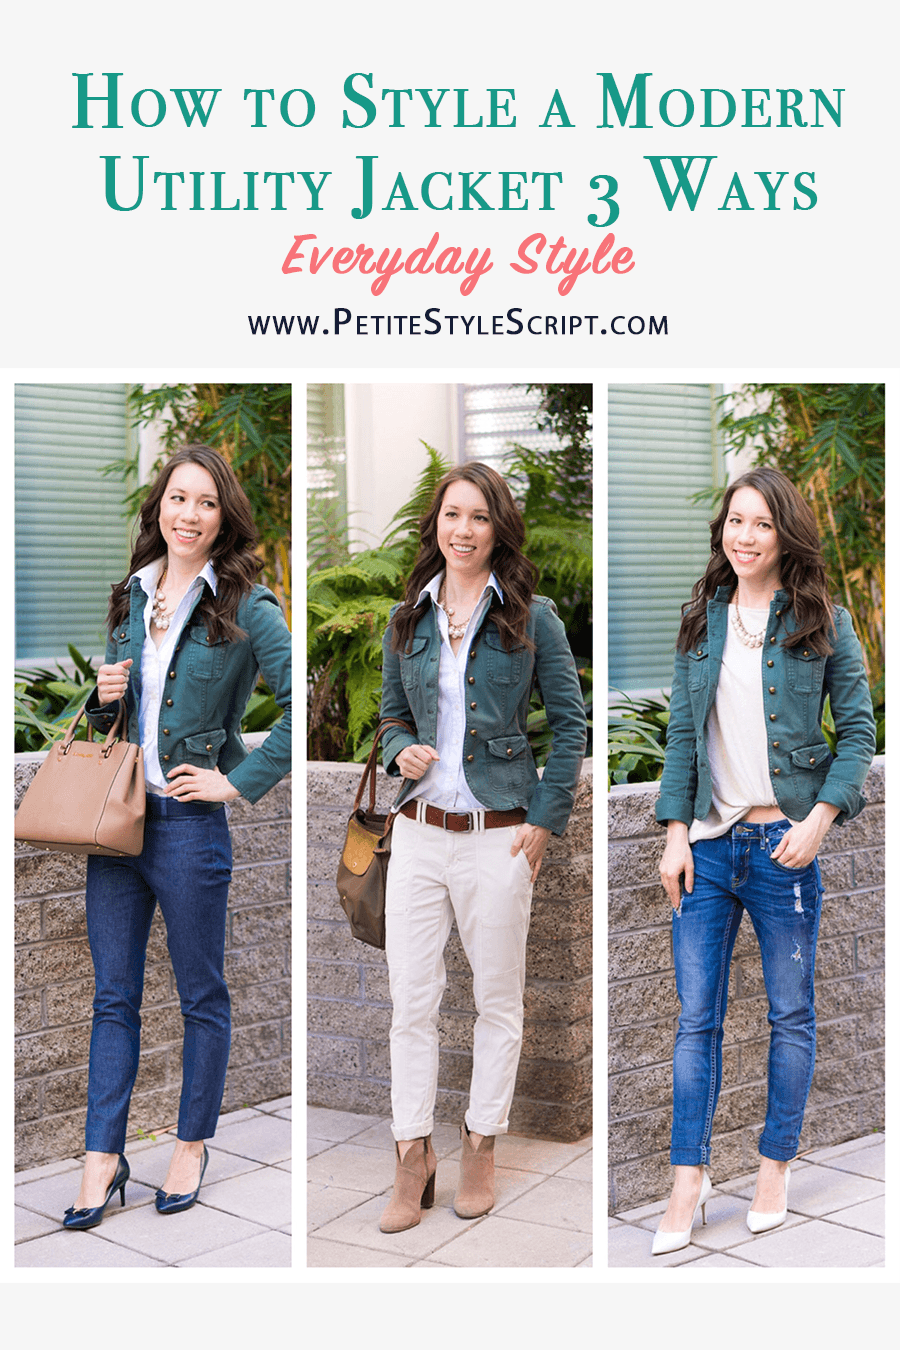 How to Style a Modern Utility Jacket 3 